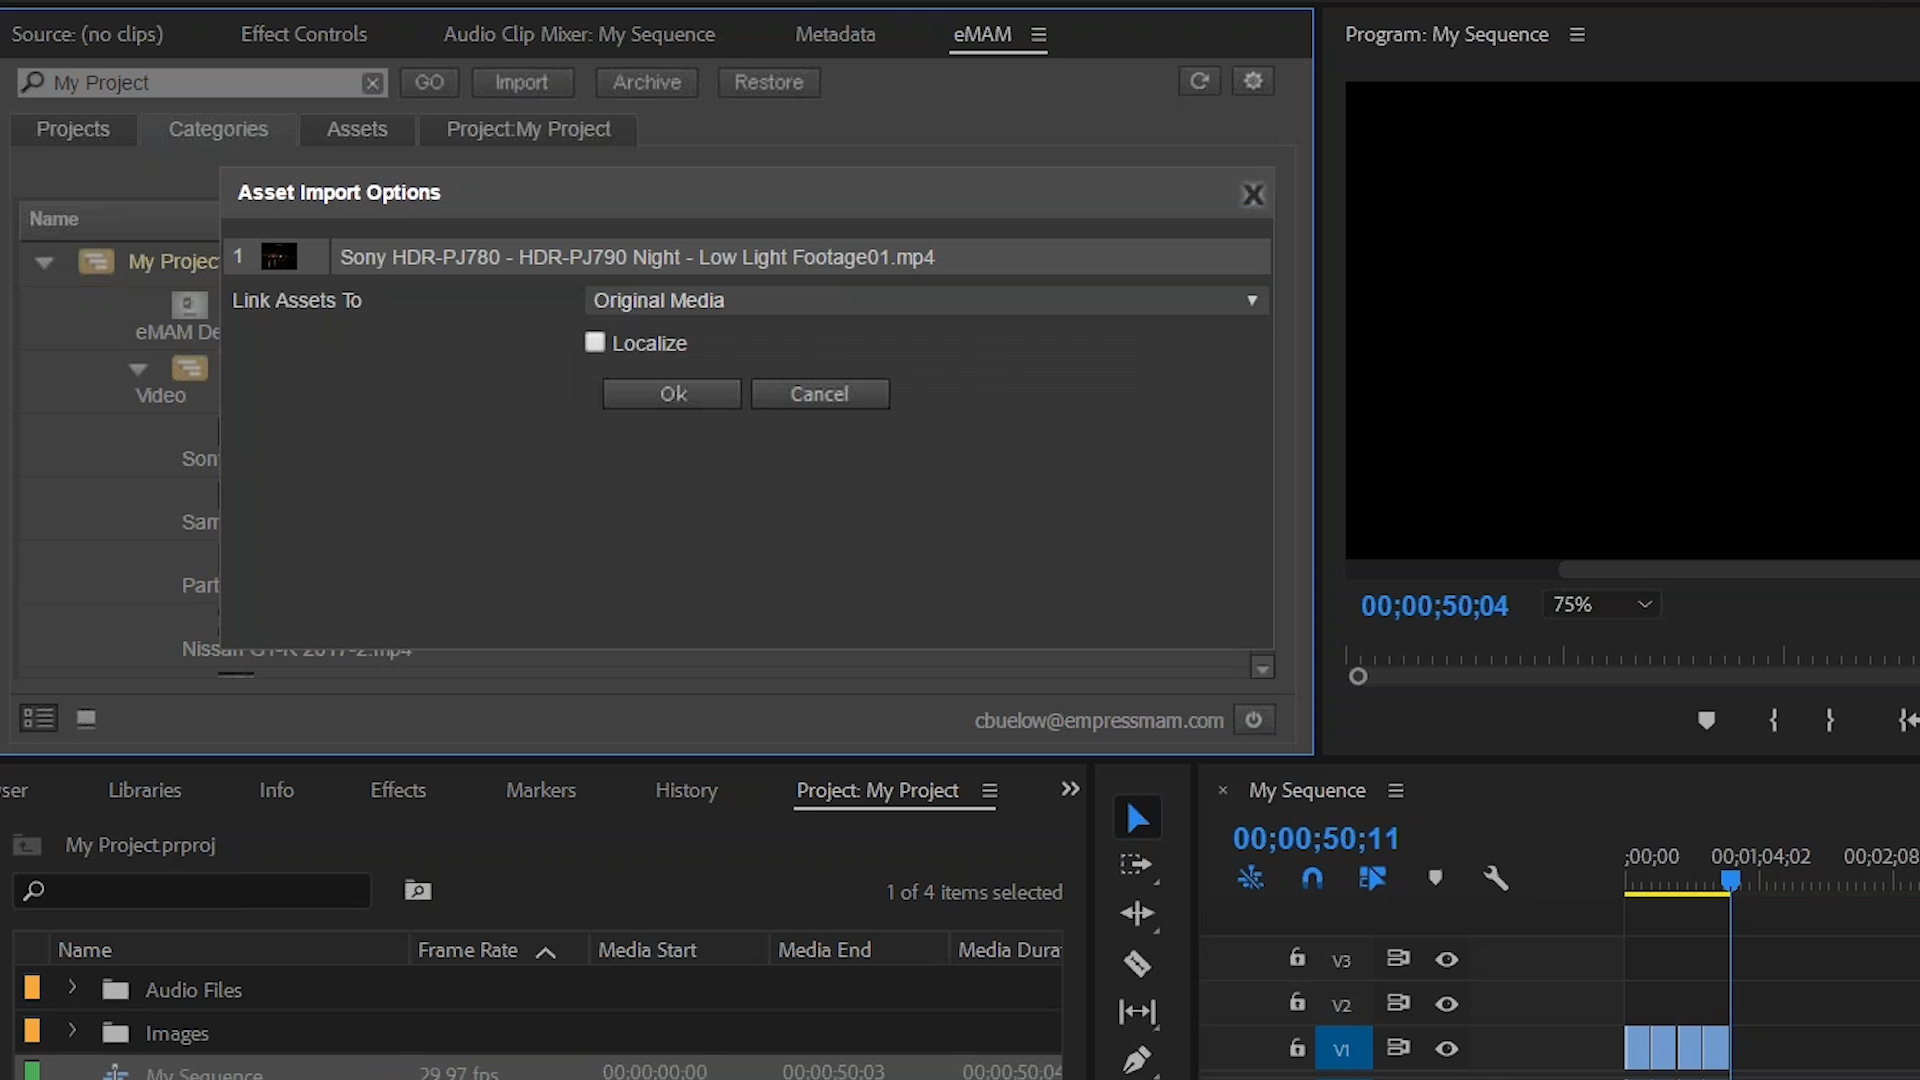 Editors can connect to eMAM's system directly from Adobe applications or inside Final Cut Pro X.  After edits are complete, request approval or export video back into eMAM's system for sharing.